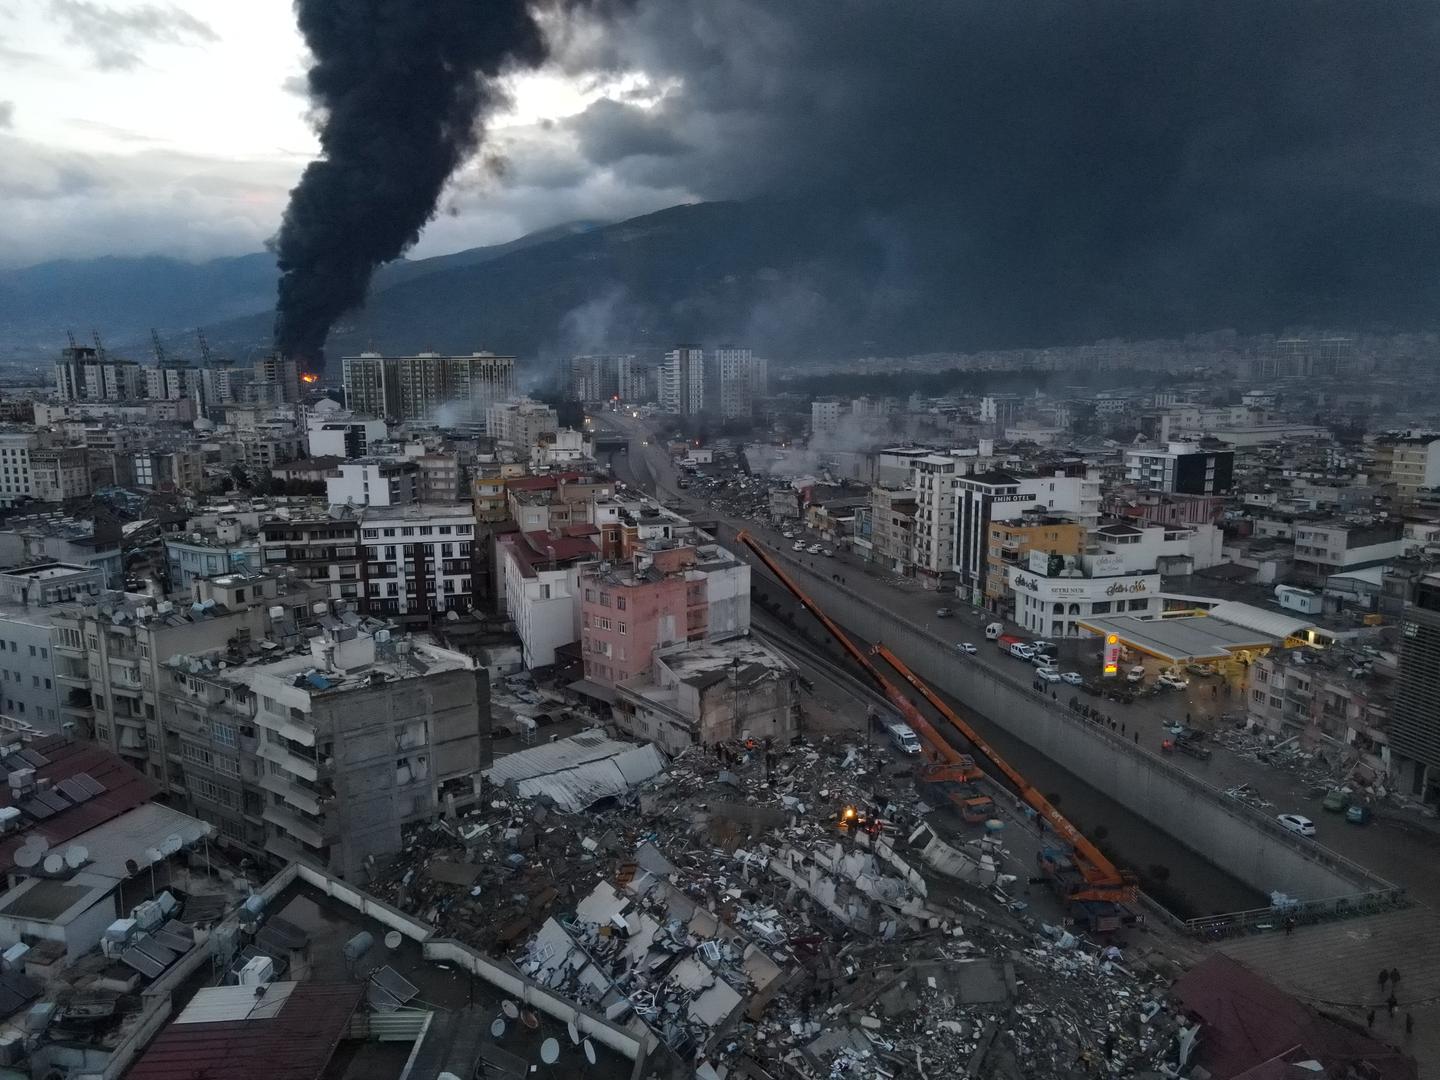 Black smoke from a fire rises over central Iskenderun, following an earthquake in Turkey February 7, 2023. Serday Ozsoy/Depo Photos via REUTERS ATTENTION EDITORS - THIS PICTURE WAS PROVIDED BY A THIRD PARTY. NO RESALES. NO ARCHIVES. TURKEY OUT. NO COMMERCIAL OR EDITORIAL SALES IN TURKEY. Photo: Depo Photos/REUTERS